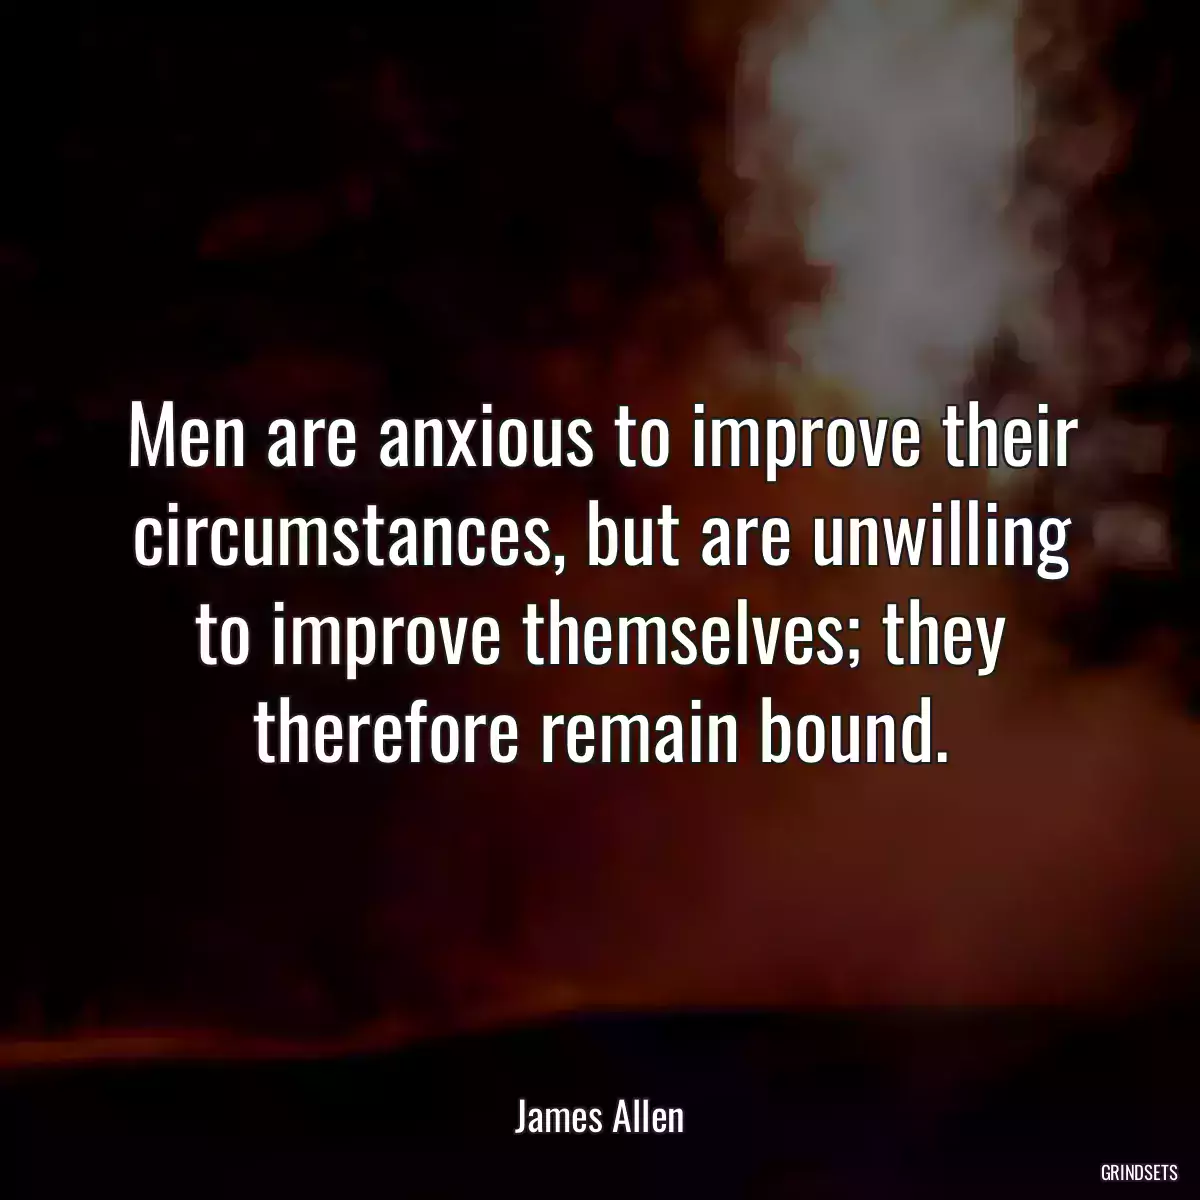 Men are anxious to improve their circumstances, but are unwilling to improve themselves; they therefore remain bound.